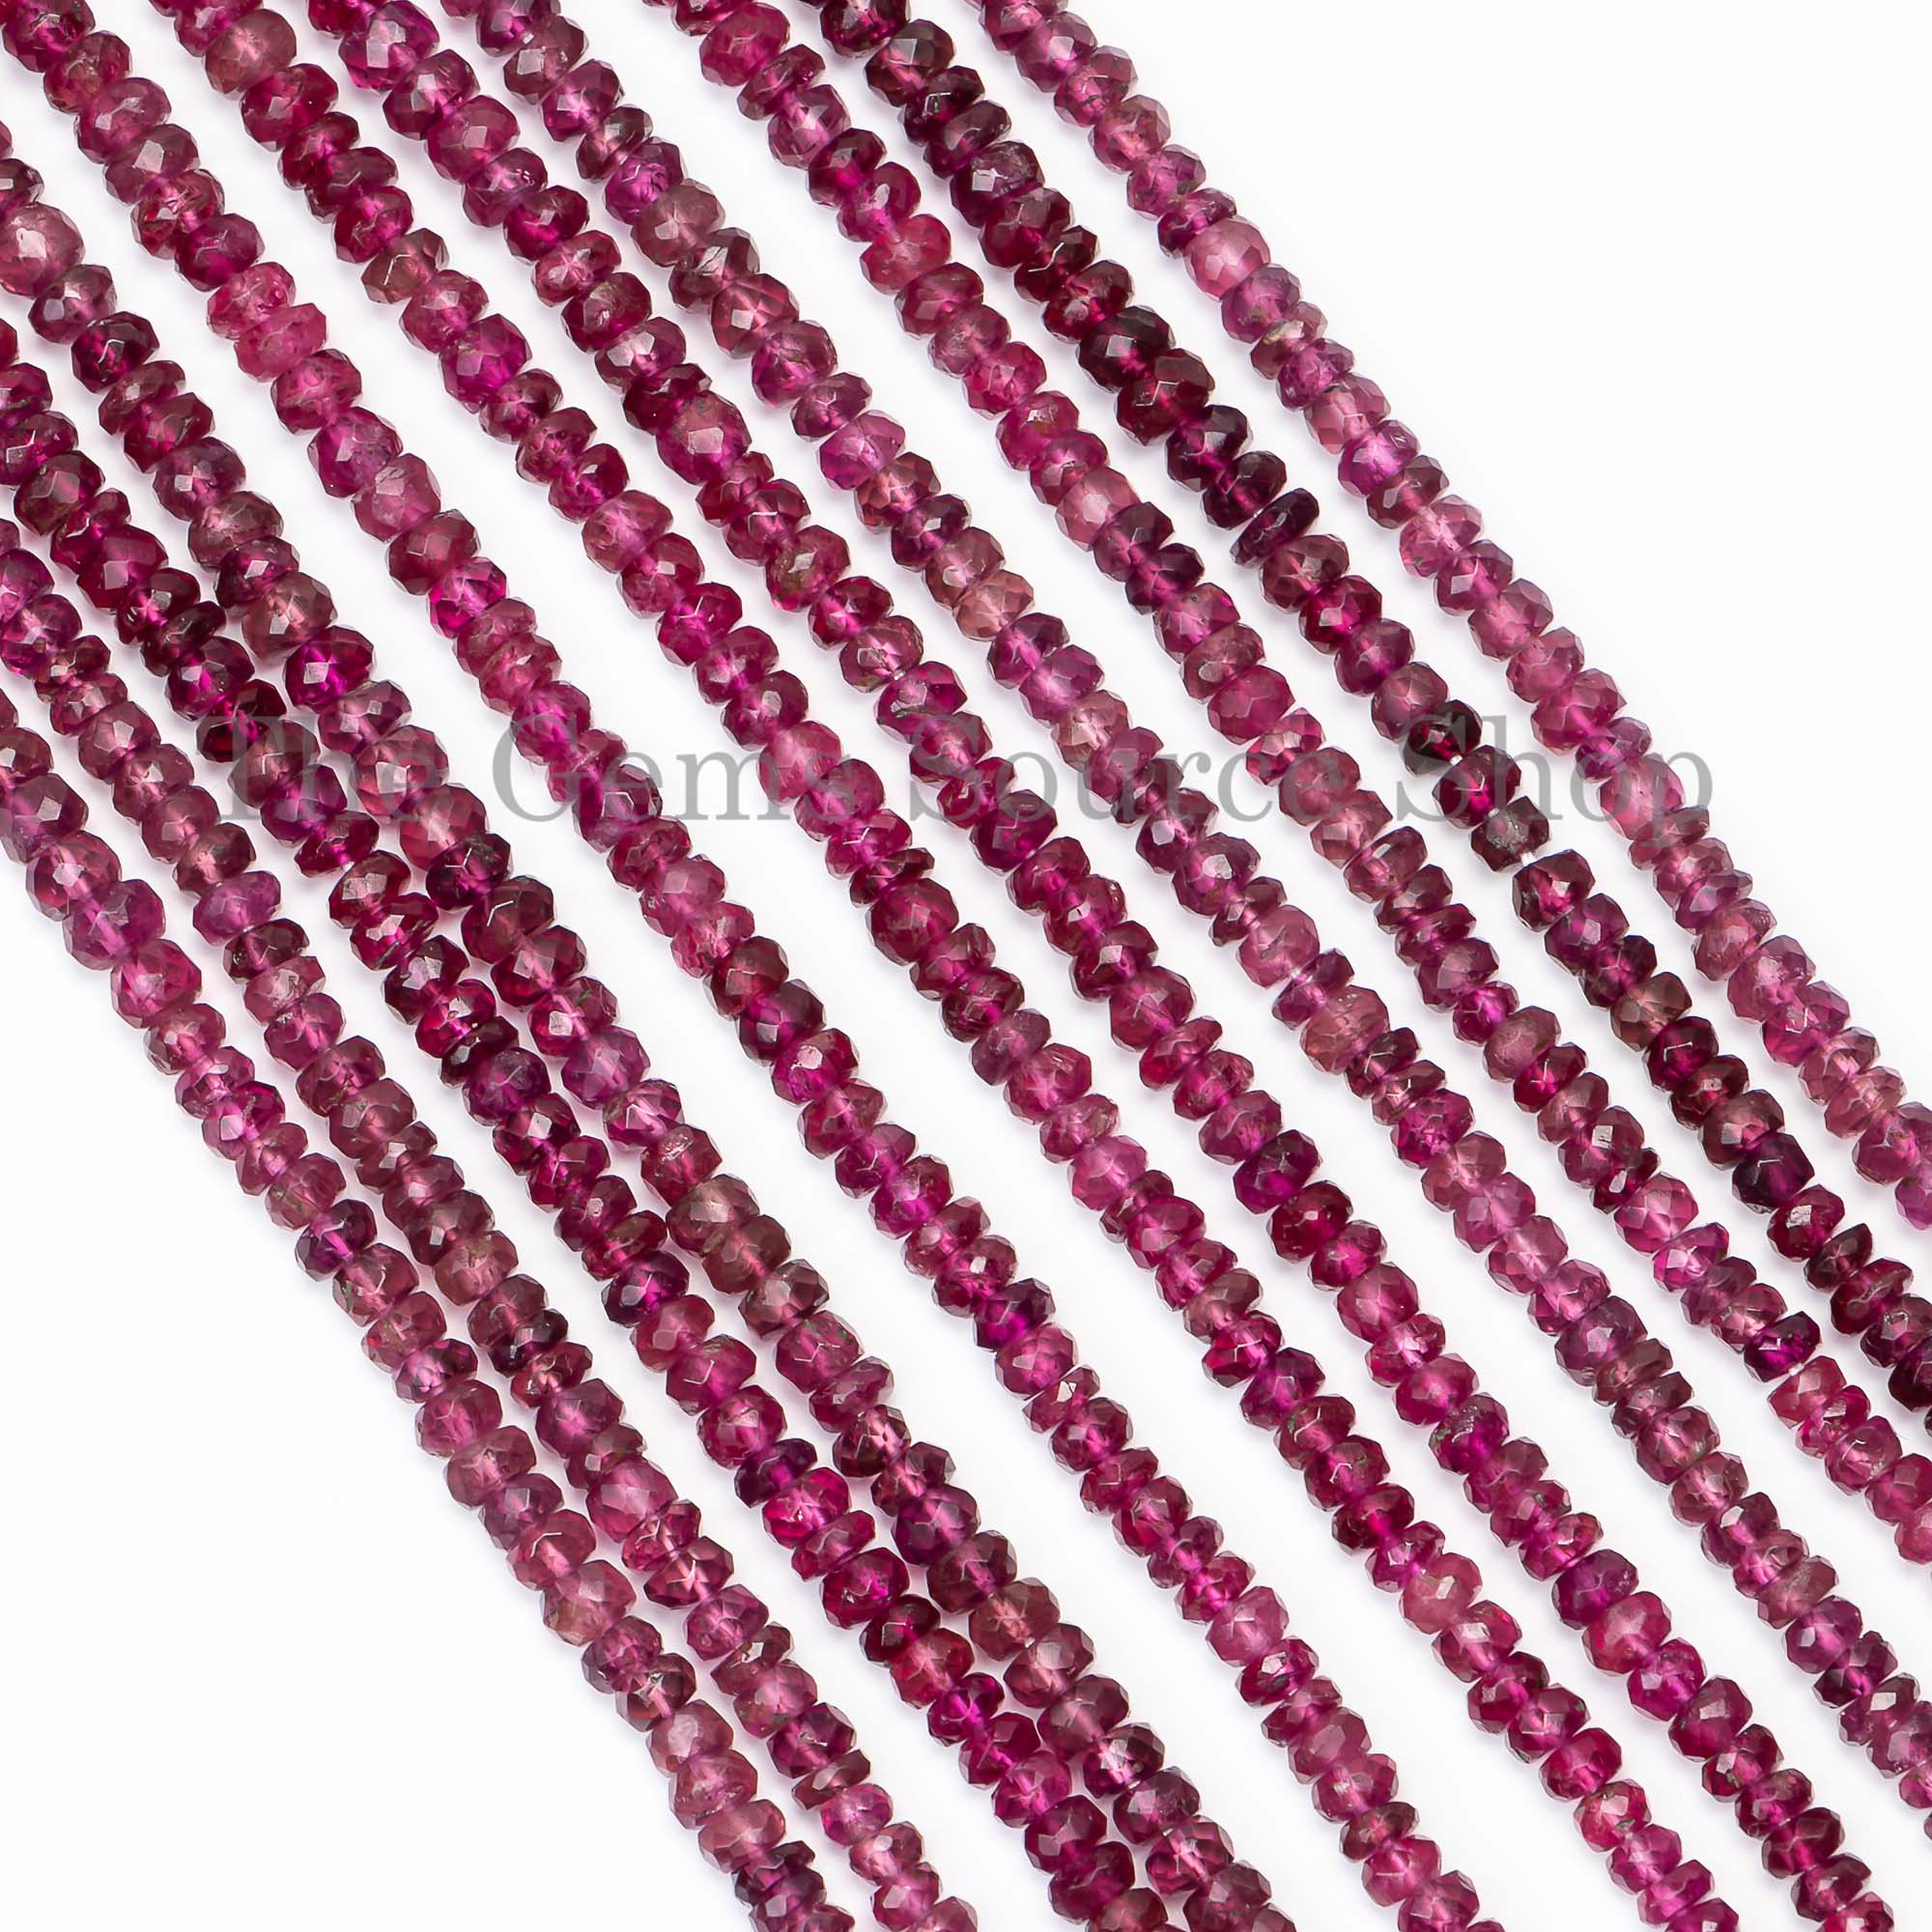 Rubellite Tourmaline Faceted Rondelle Beads, Rubellite Faceted Beads, 3-4.5mm Tourmaline Beads